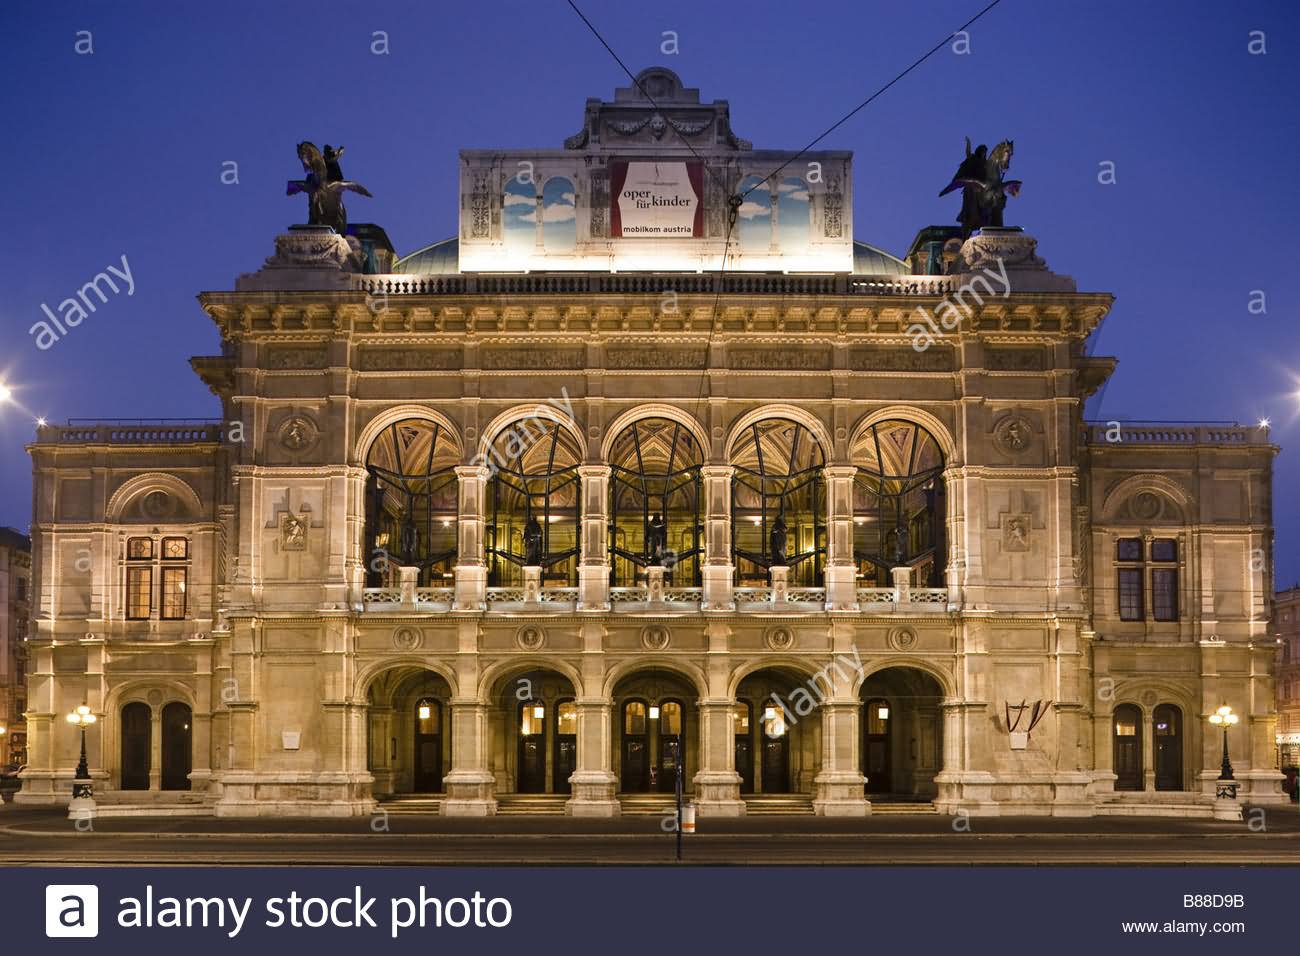 Night View Image Of The Burgtheater In Vienna, Austria